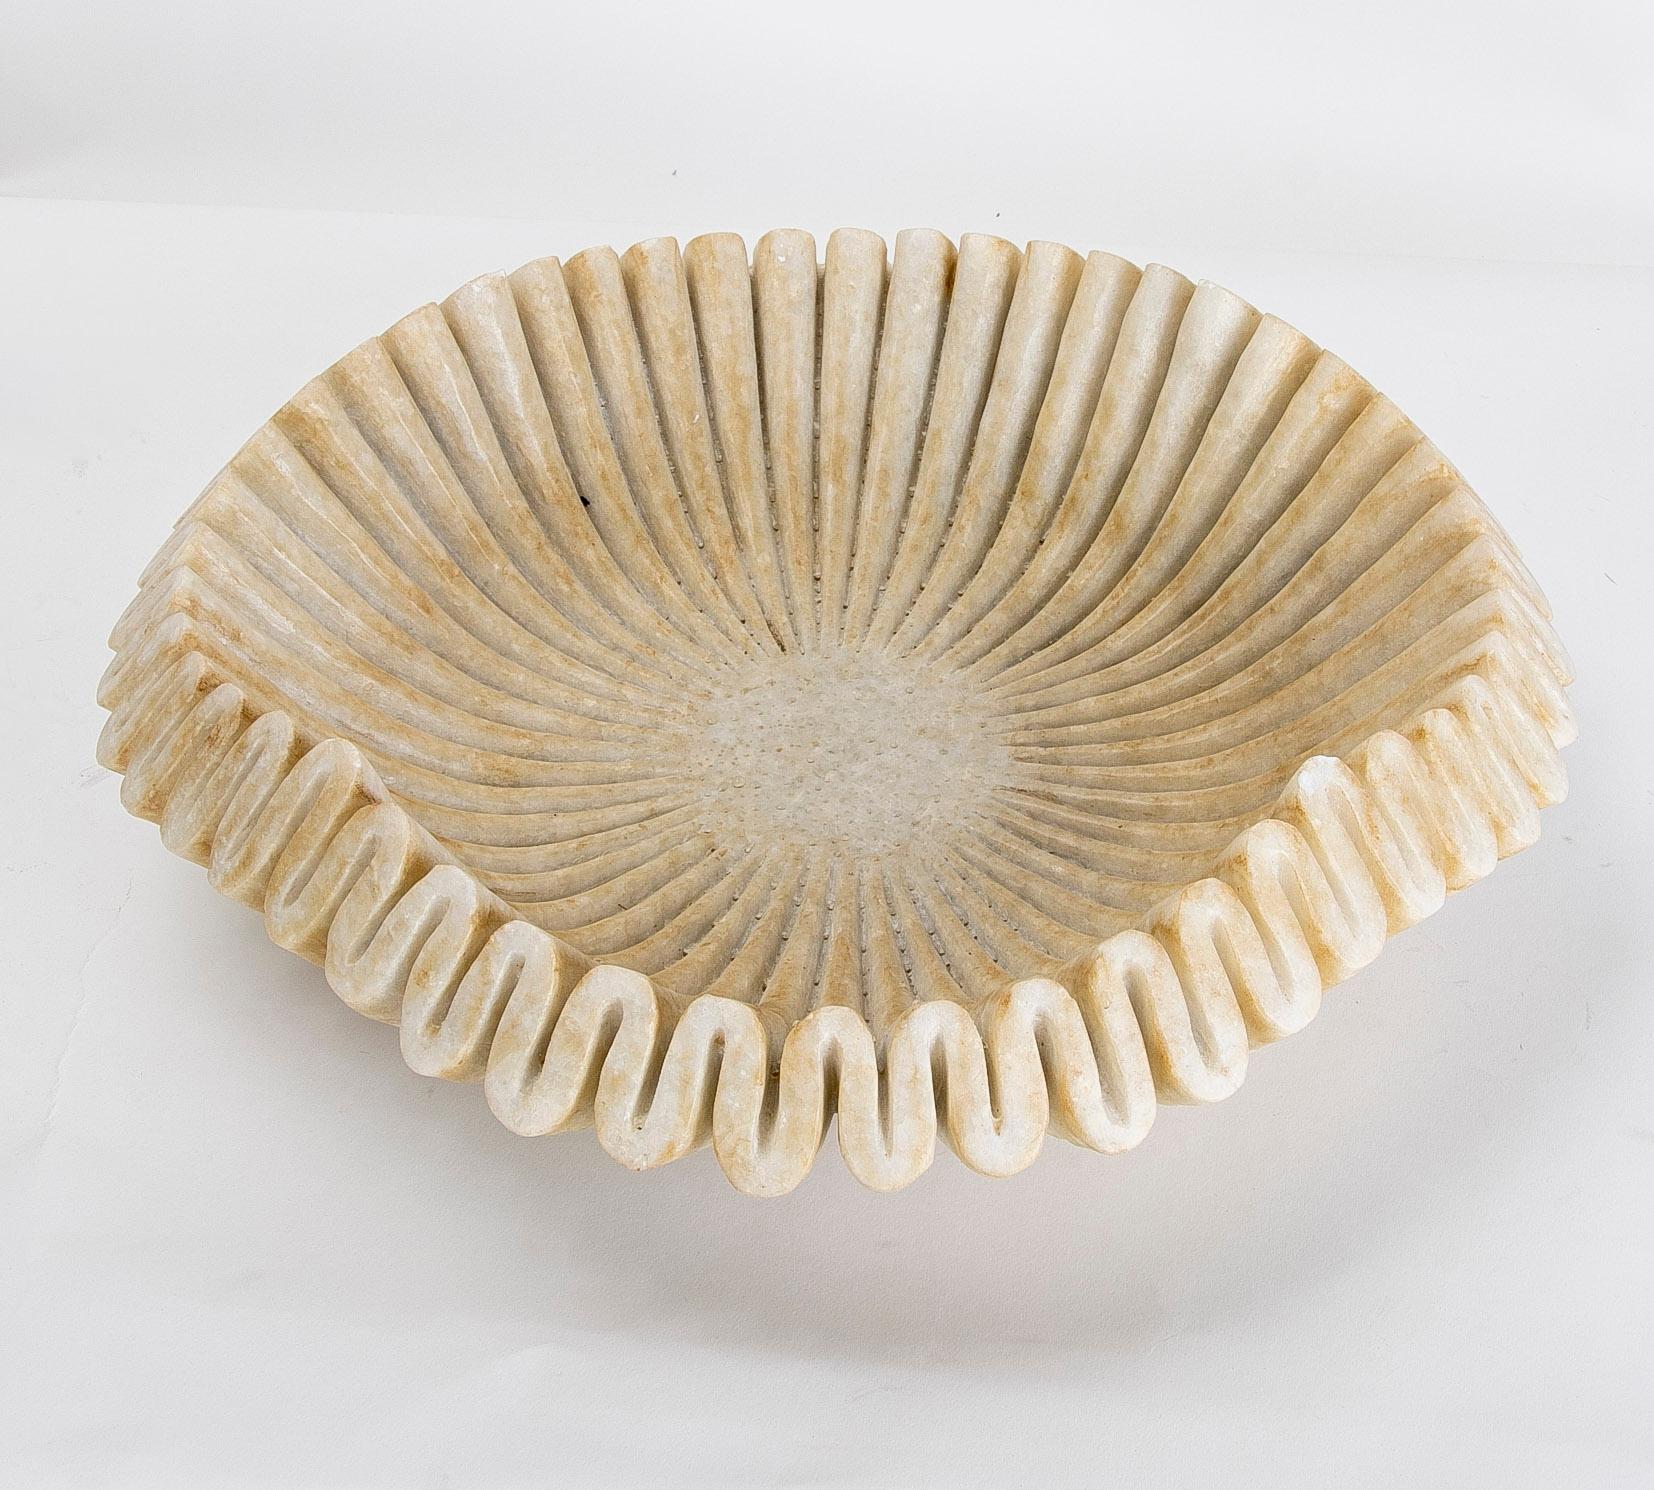 Hand-Carved White Marble Decorative Dish with Wavy Forms For Sale 7